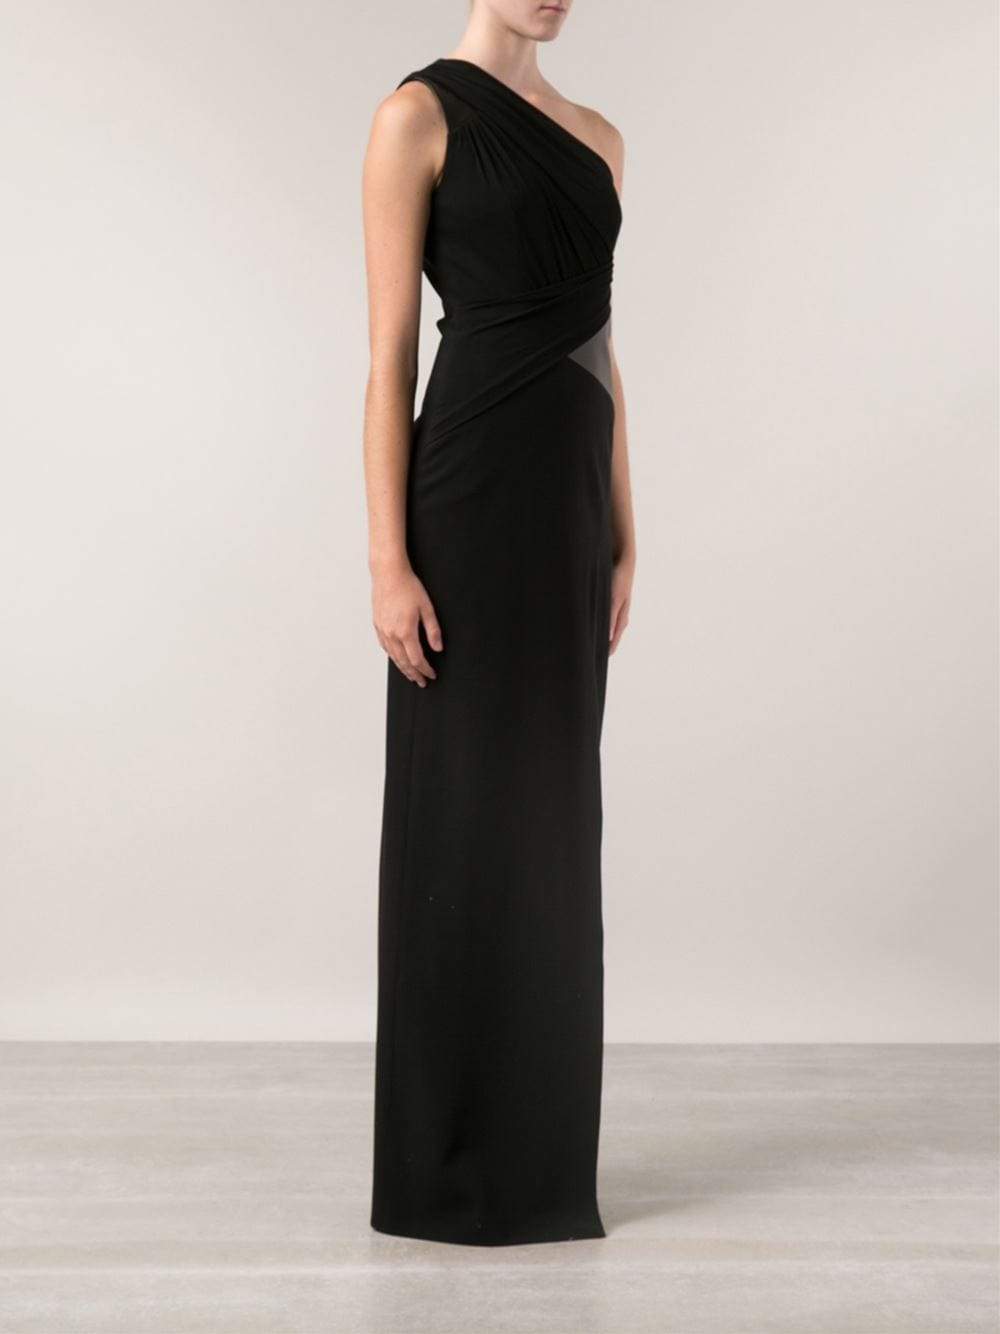 One Shoulder Jersey And Leather Gown CLOTHINGDRESSGOWN MICHAEL KORS   